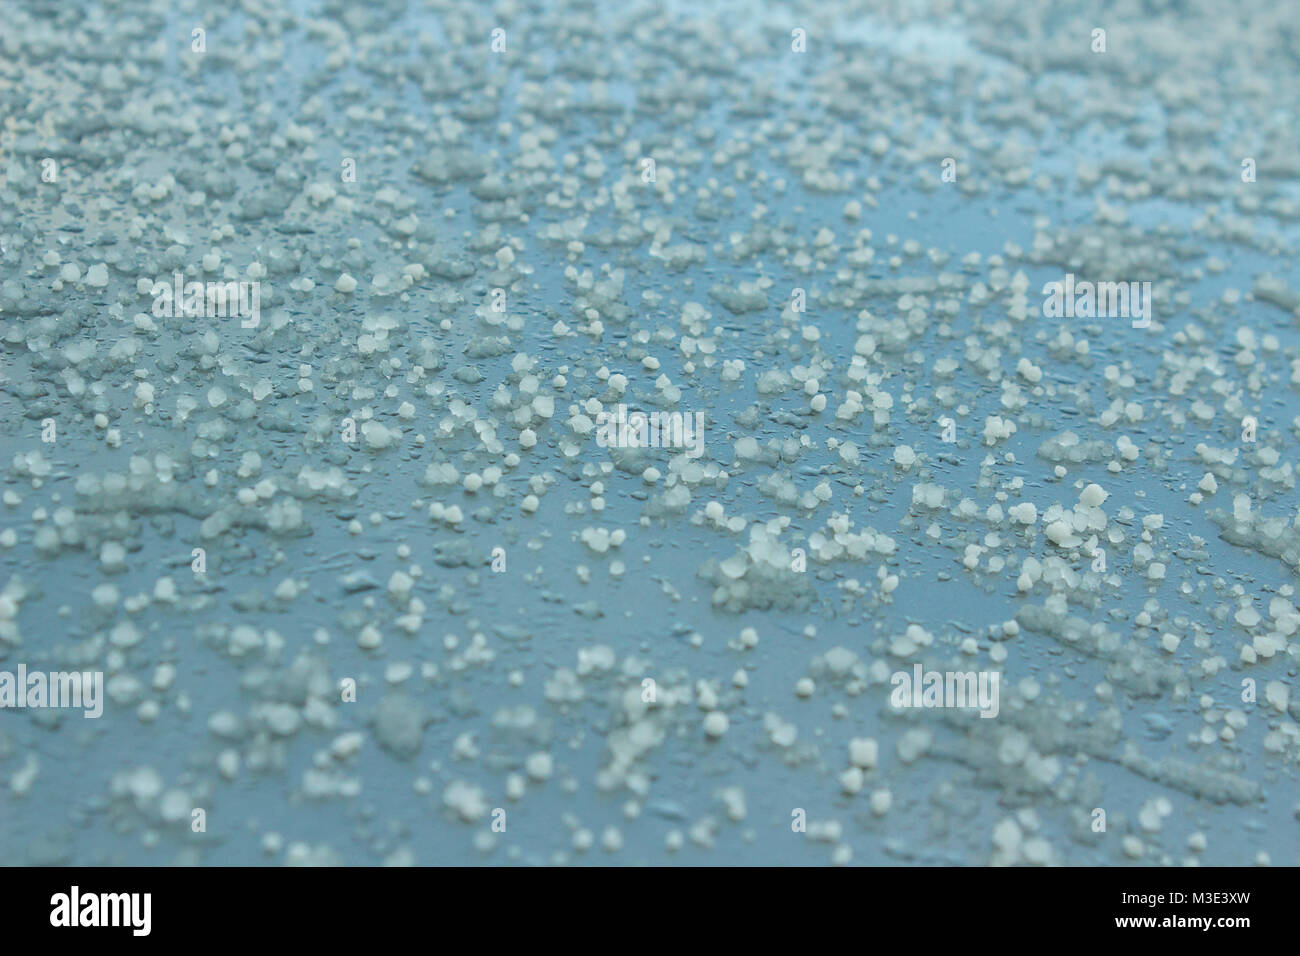 Frozen hailstones on a silver car roof following a cold winter shower Stock Photo